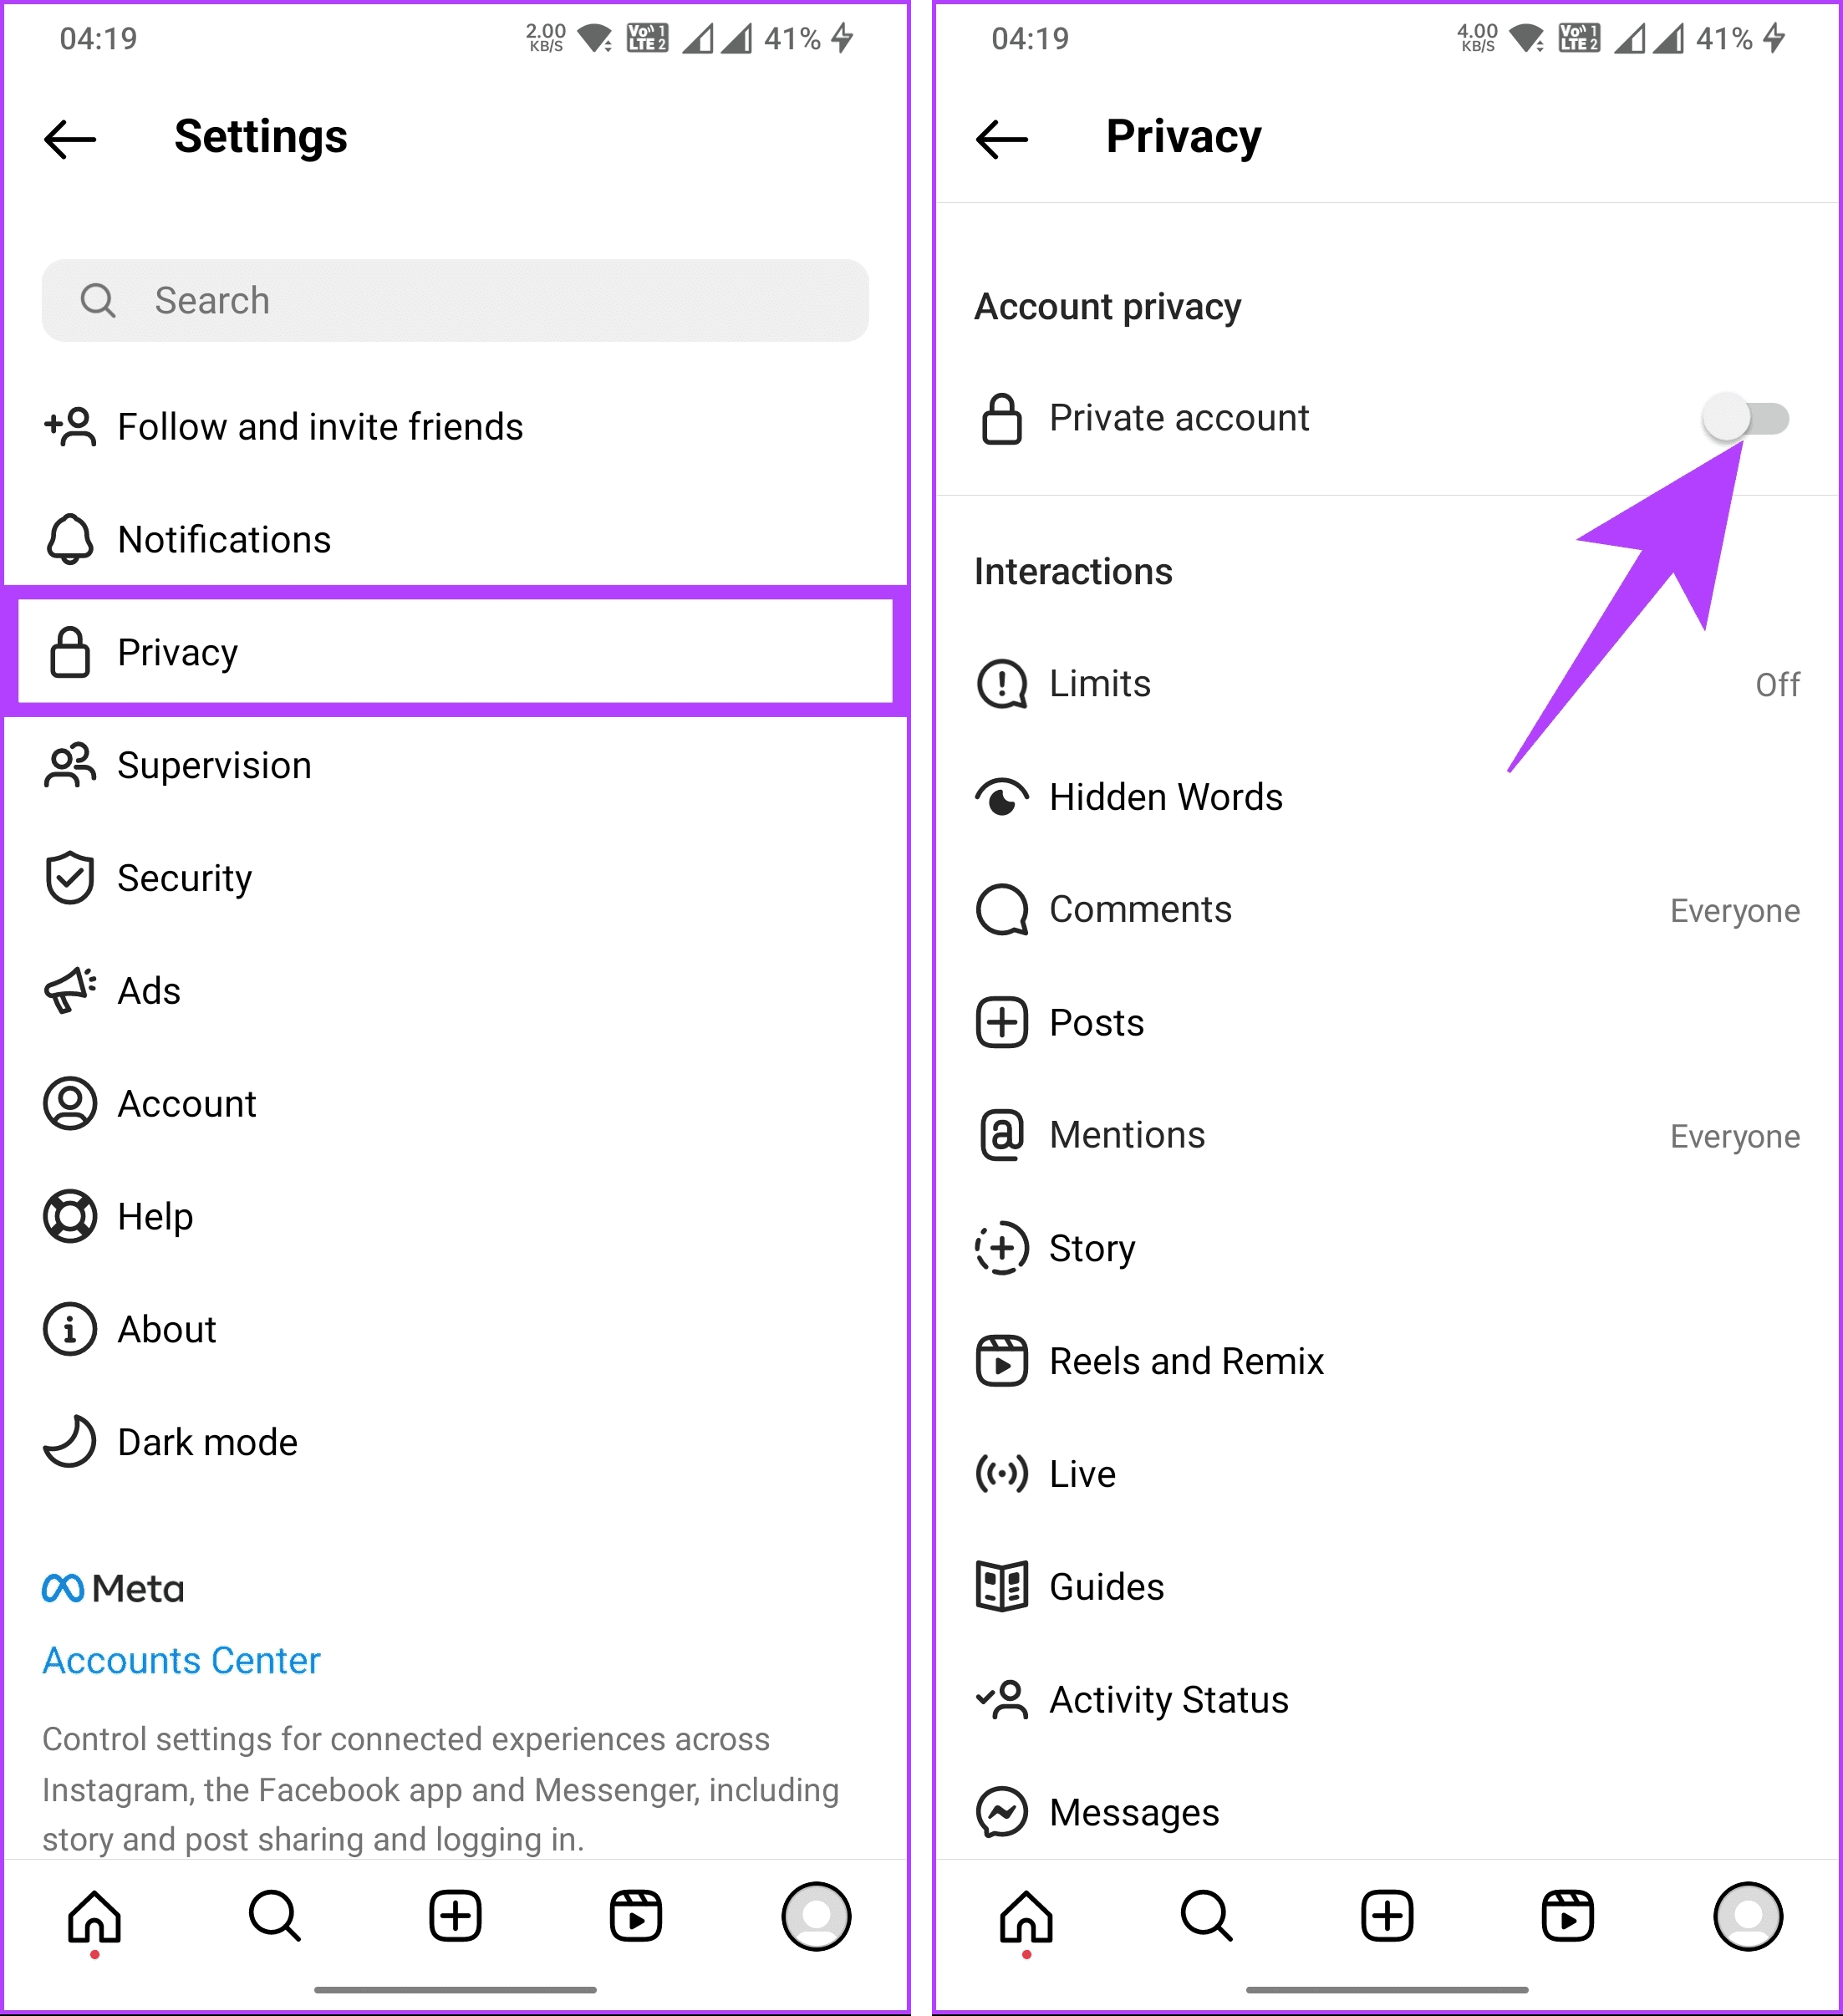 toggle on the Private account button